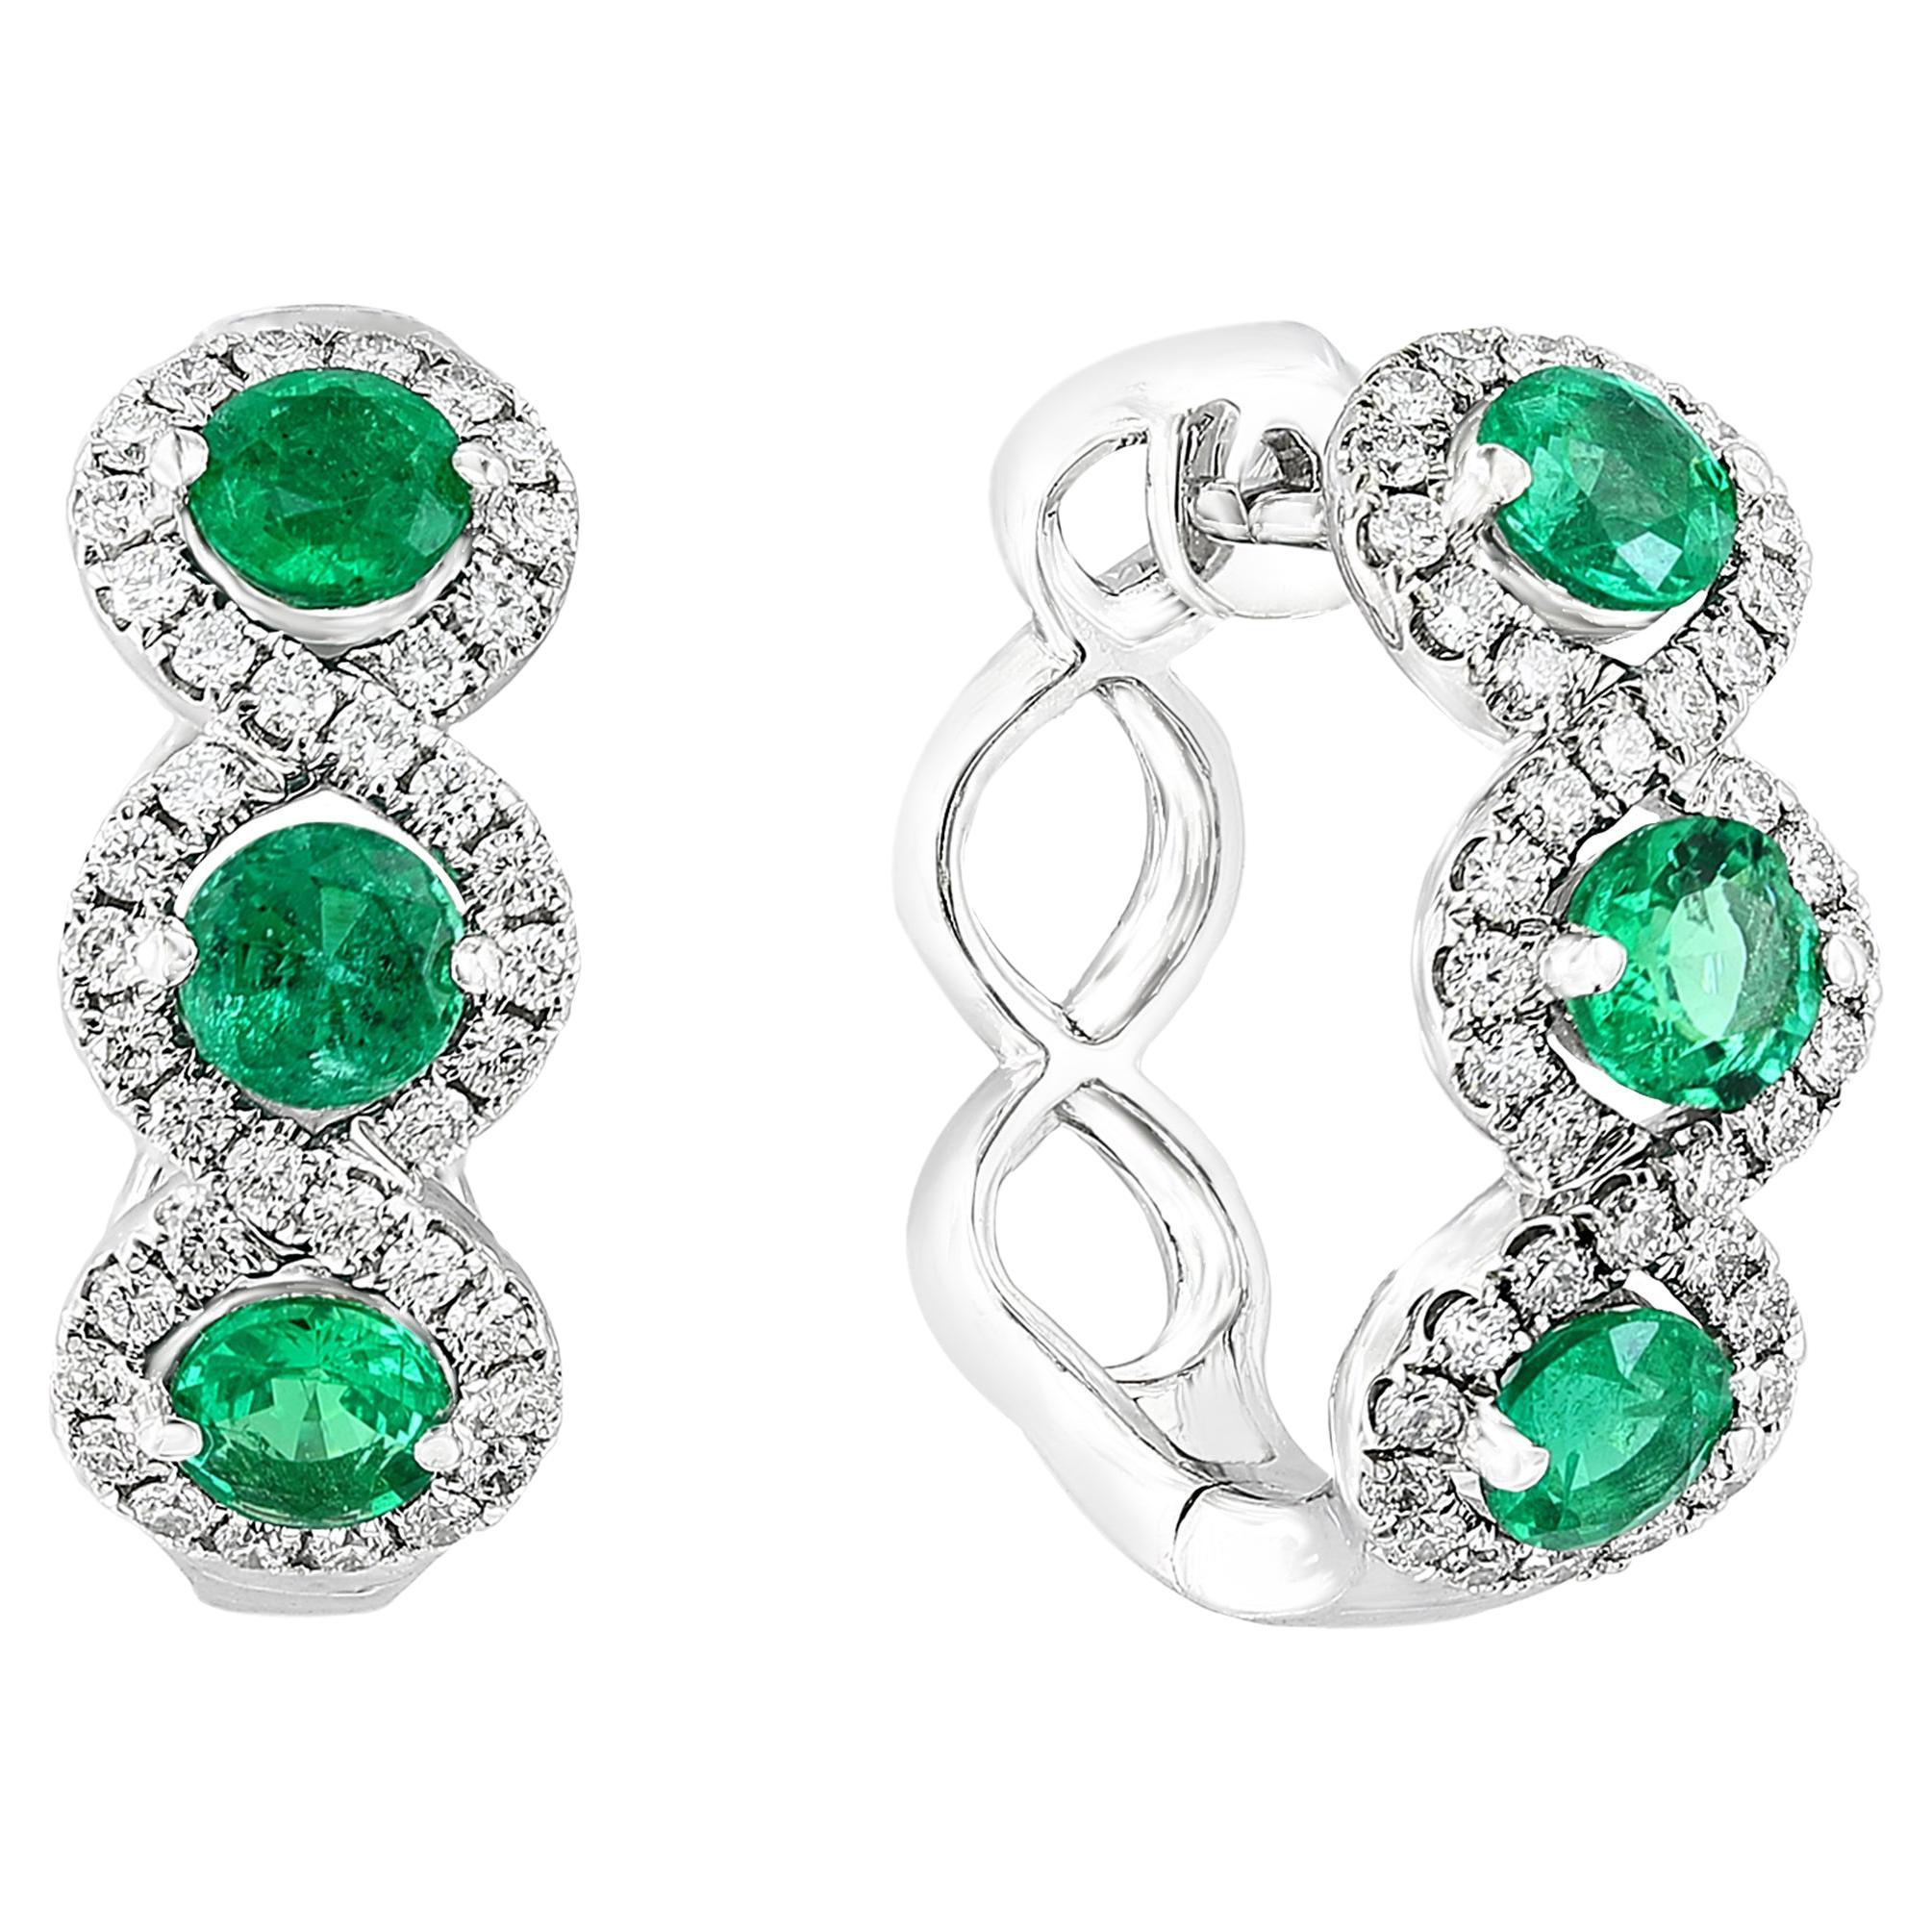 1.72 Carat Round Cut Emerald and Diamond Hoop Earrings in 18K White Gold